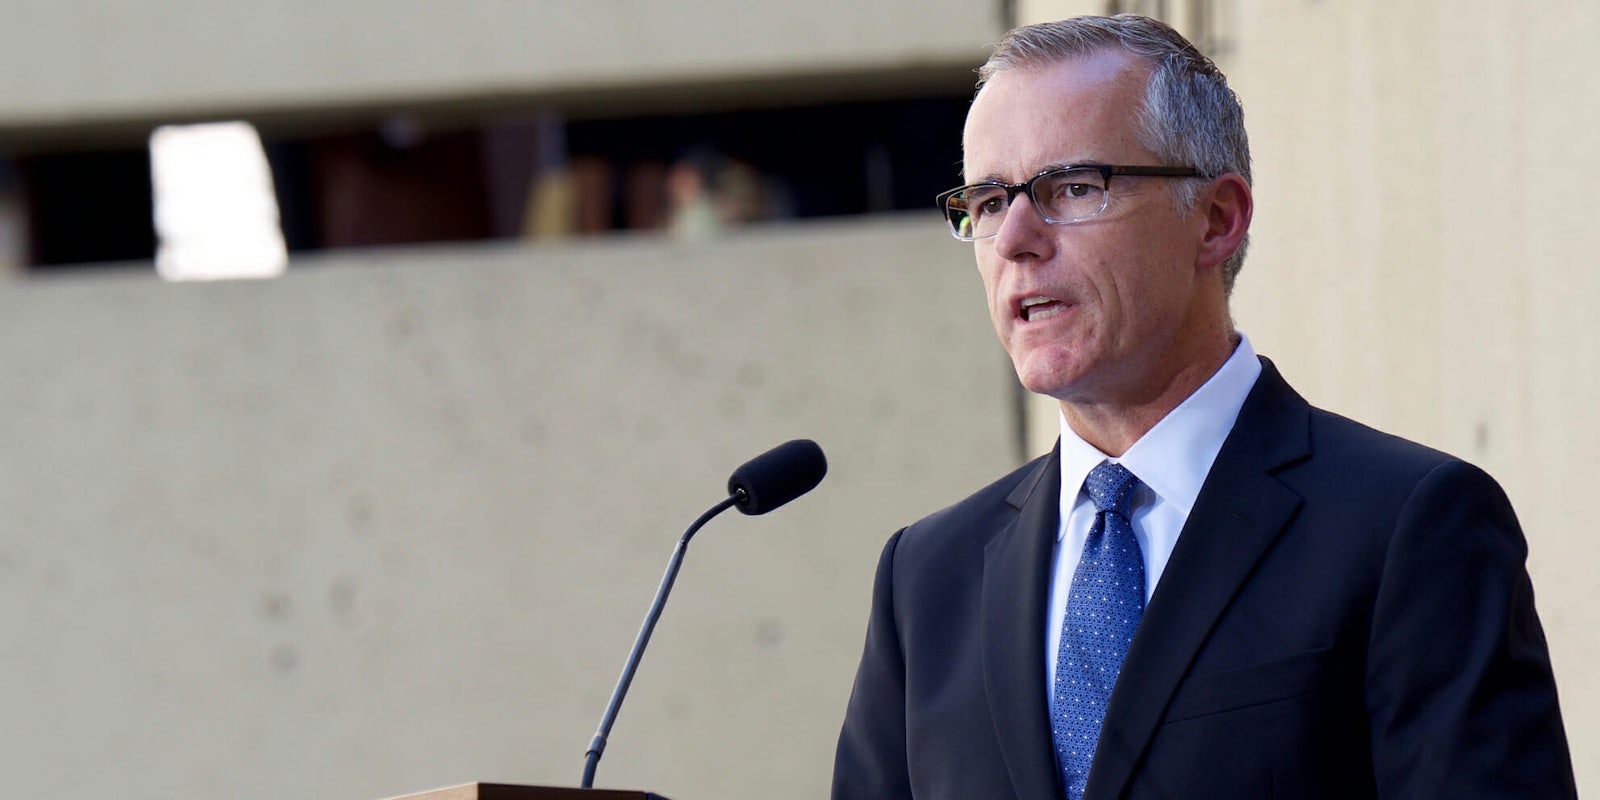 FBI Deputy Director Andrew McCabe, a frequent target of President Donald Trump's ire, is stepping down, according to numerous reports.